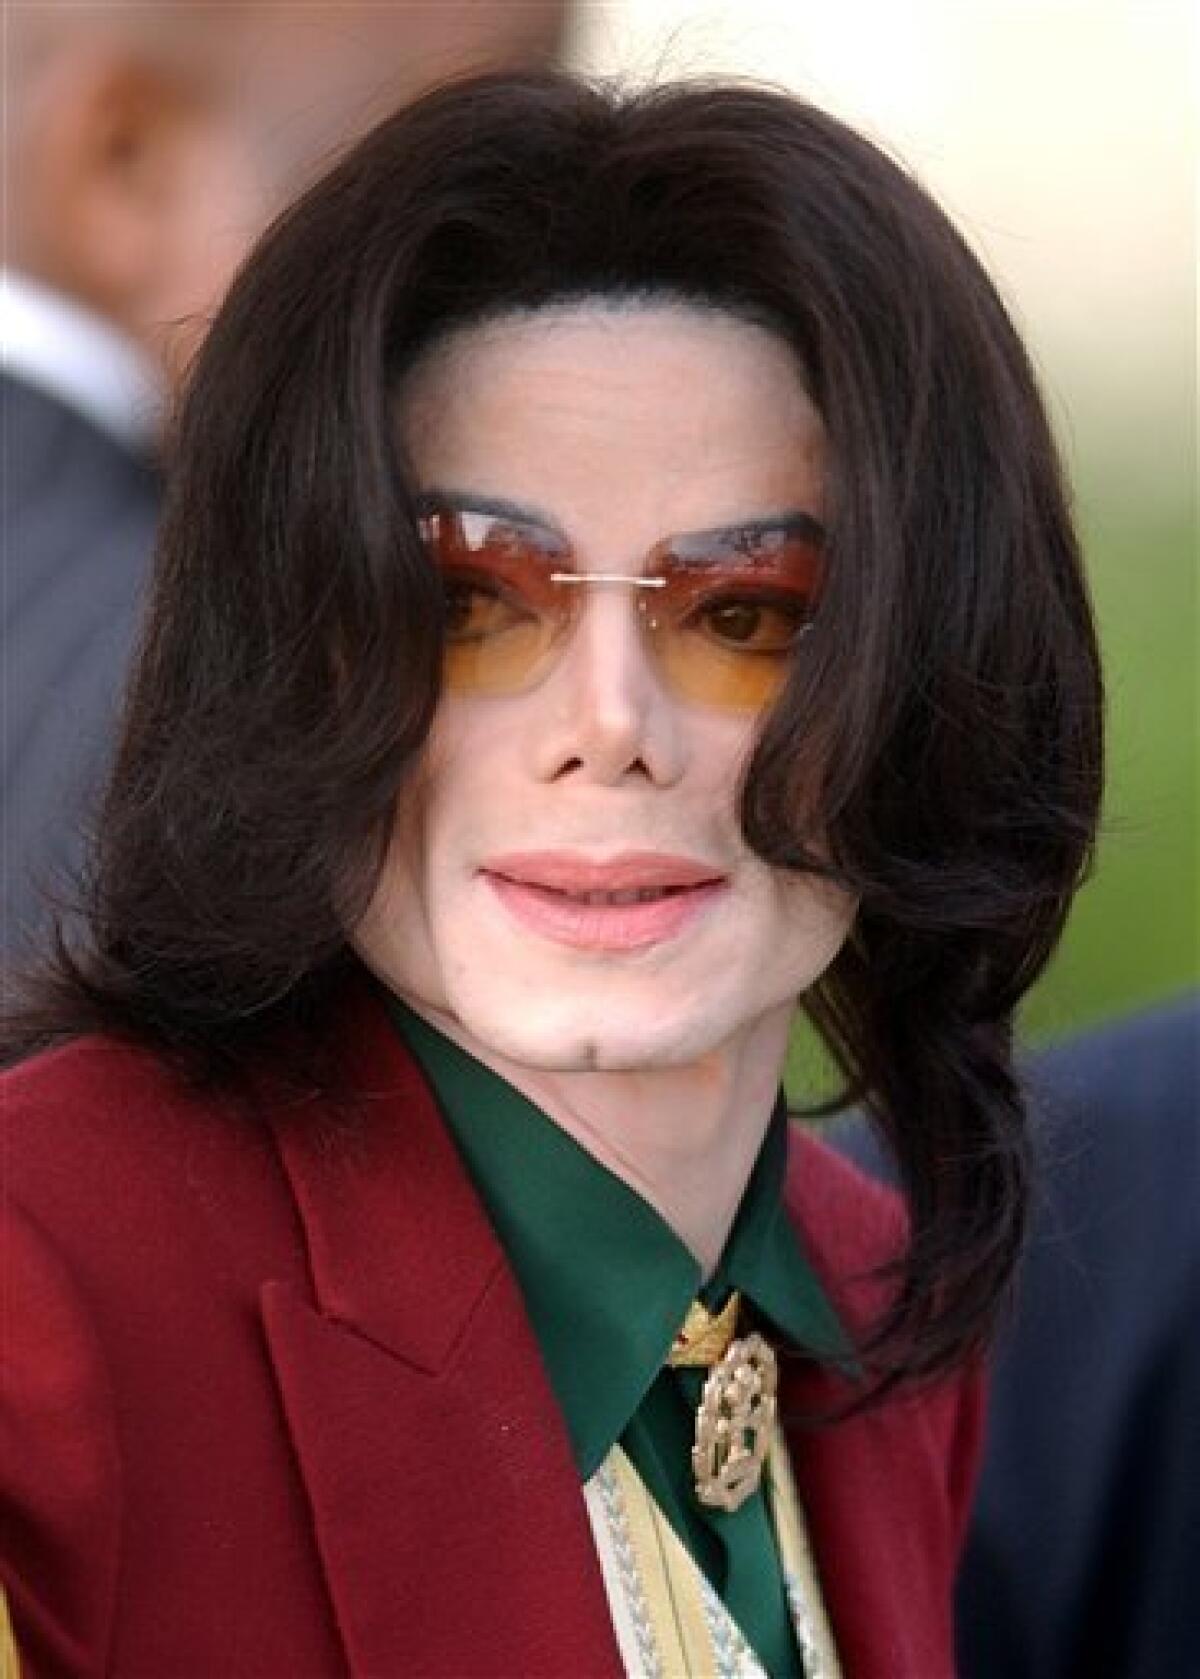 Michael Jackson explained his skin disorder after claims he was bleaching  it to become white